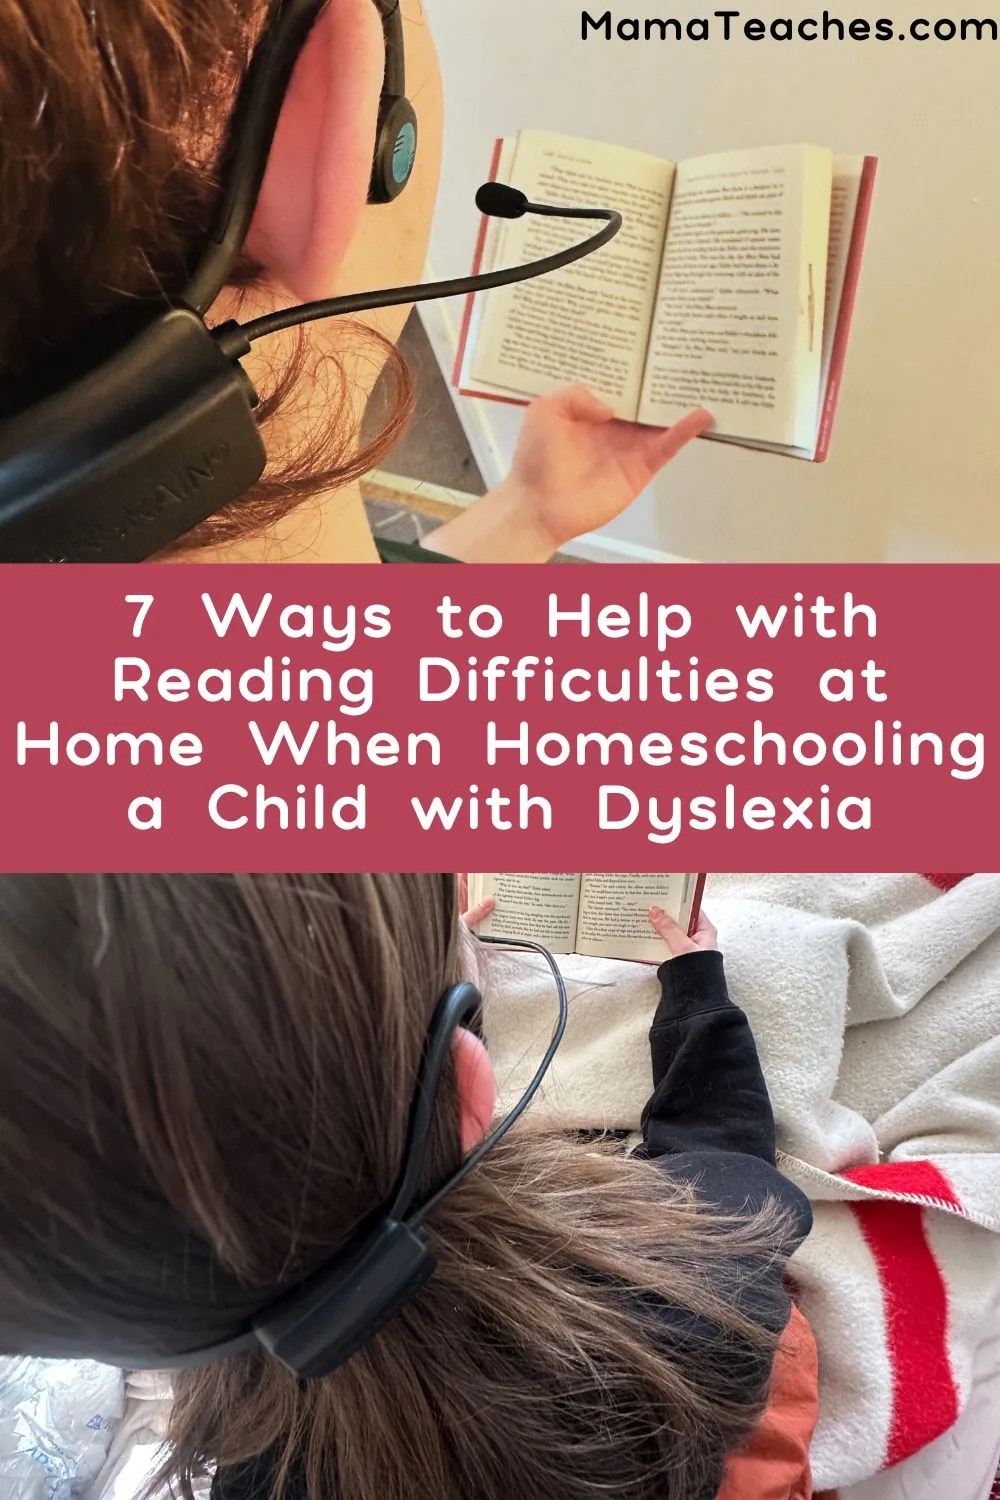 7 Ways to Help with Reading Difficulties at Home When Homeschooling a Child with Dyslexia